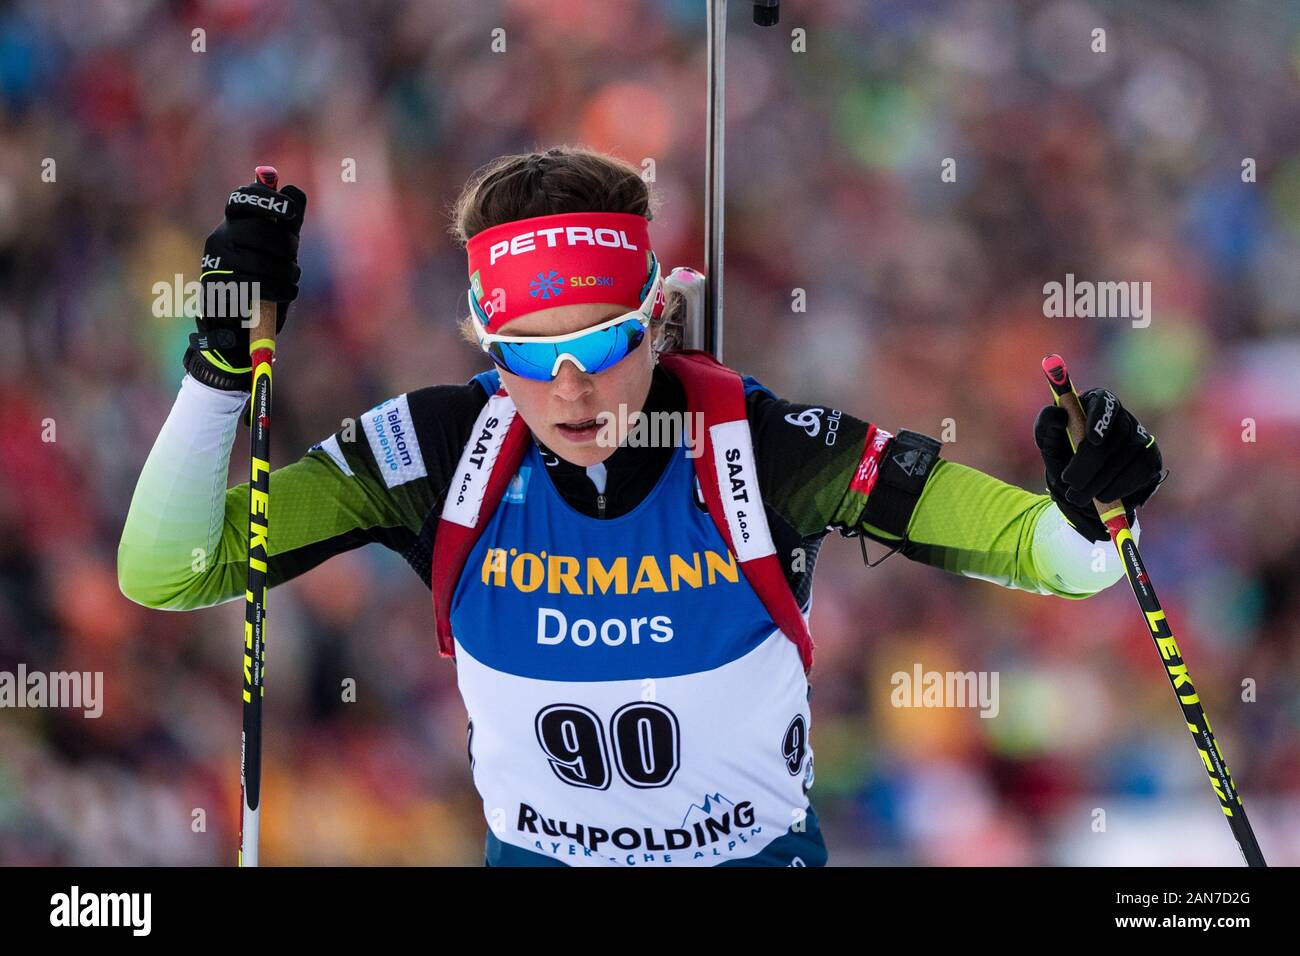 Ruhpolding, Germany. 15th Jan, 2020. Biathlon World Cup, sprint 7.5 km, women in the Chiemgau Arena